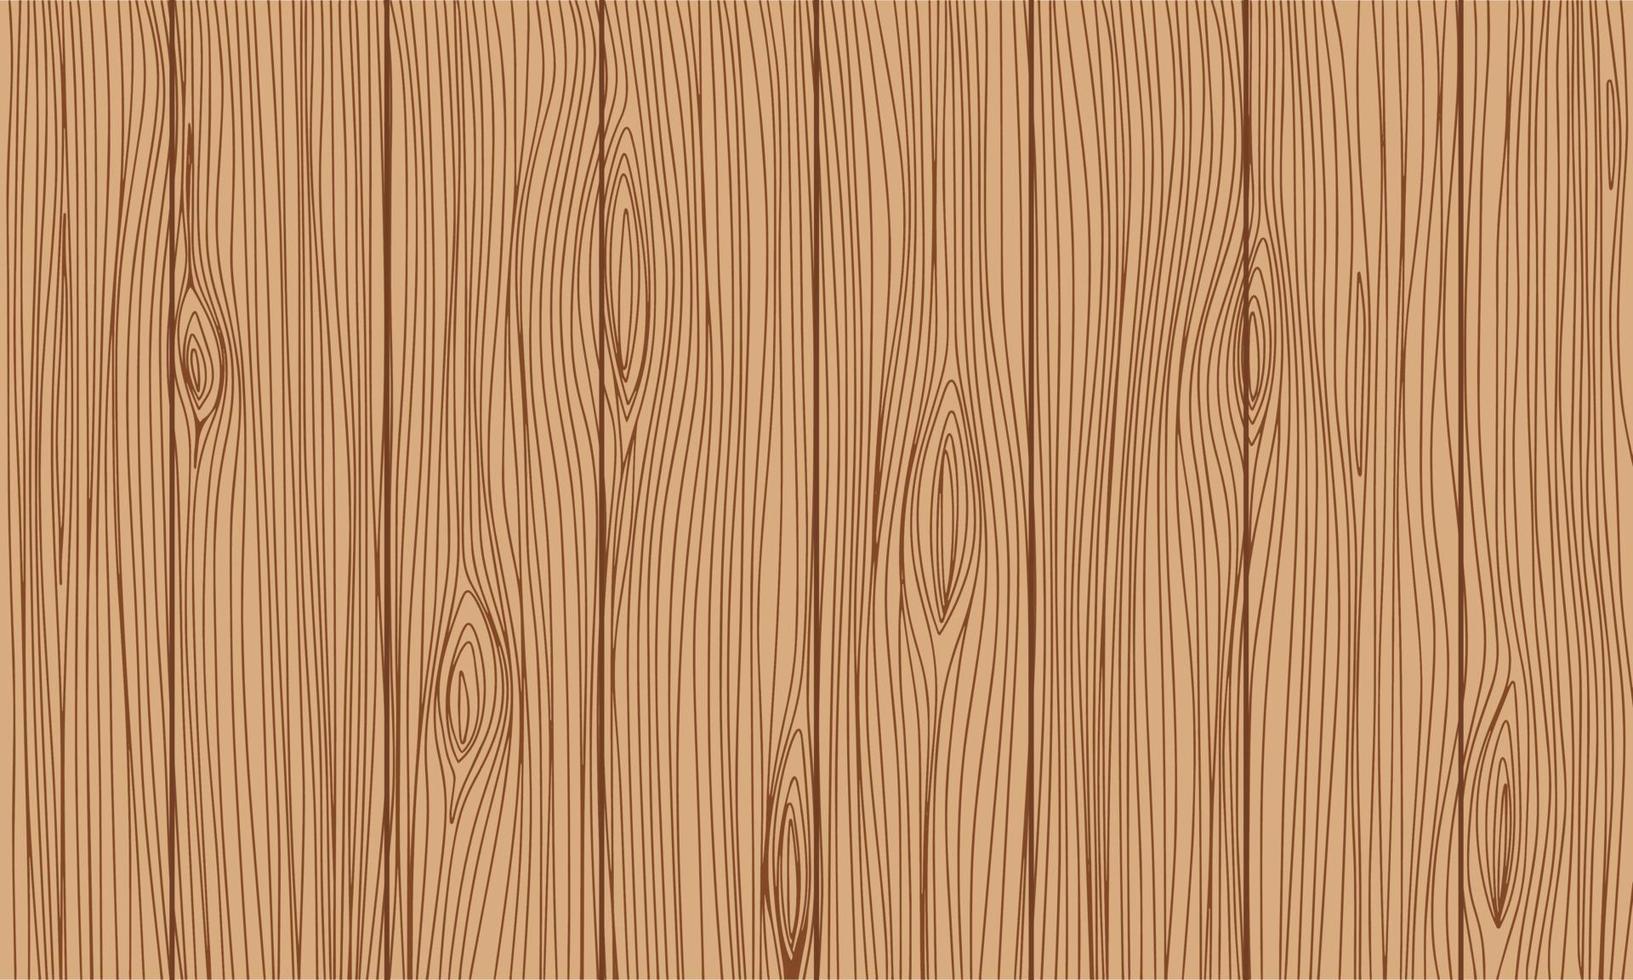 Wooden natural hand drawn background. Vector illustration